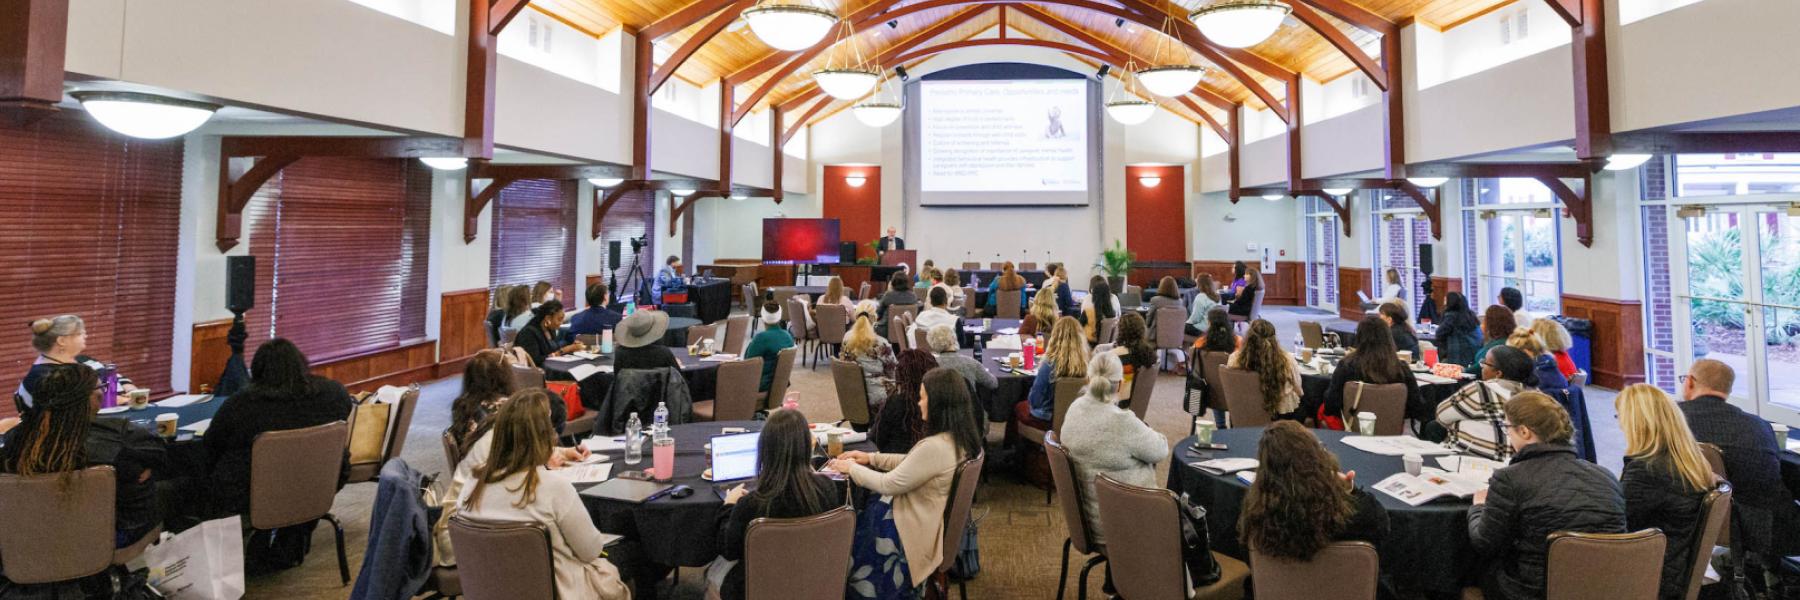 Stakeholders including doctors, nurses, midwives, researchers, educators, advocates, social workers and others gathered at the FSU Alumni Center for the conference.